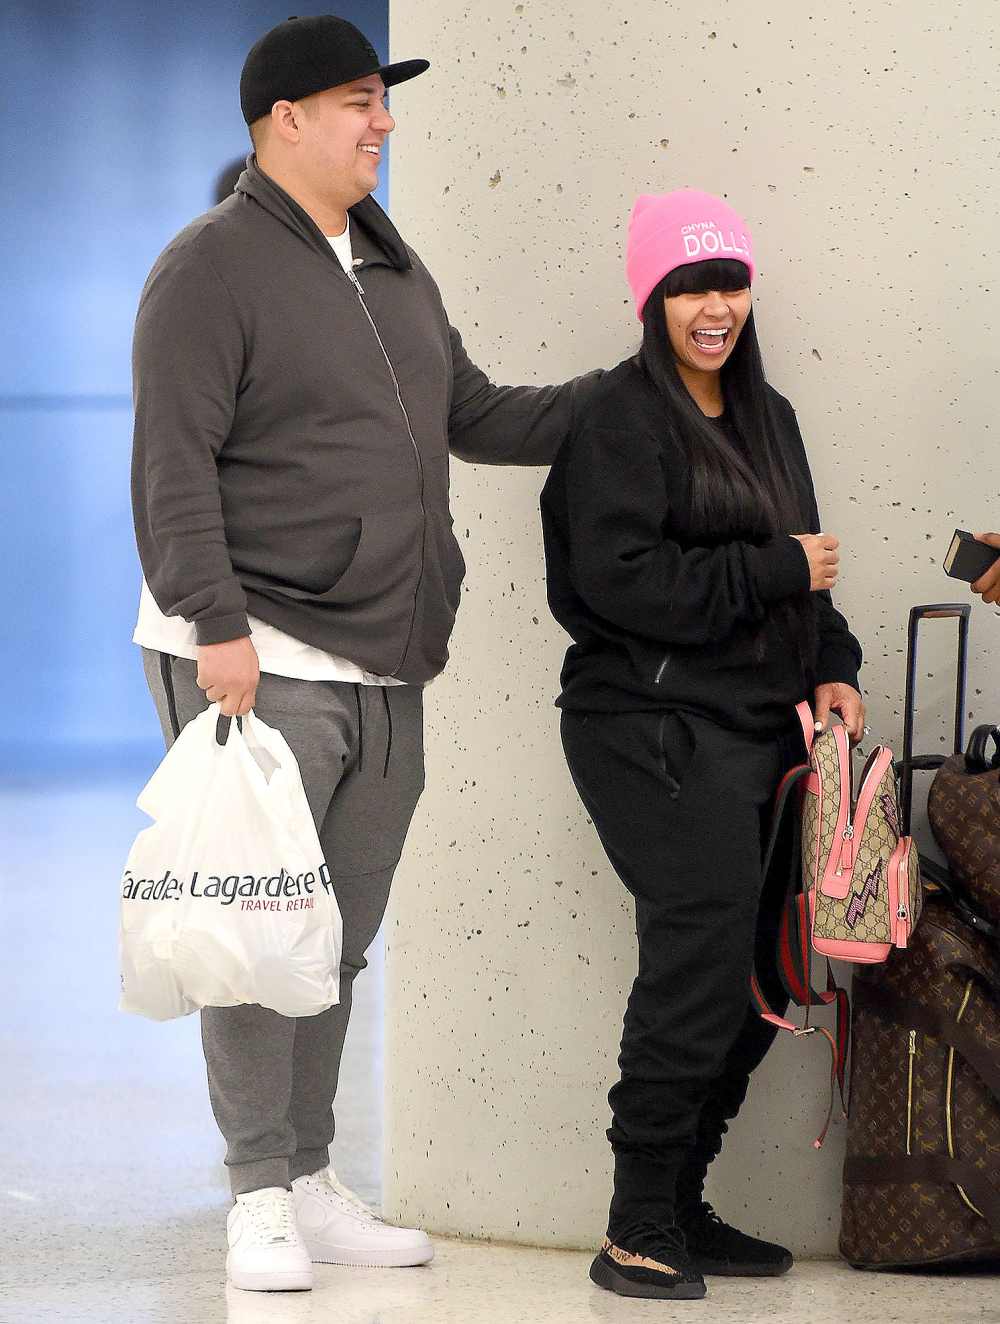 Rob Kardashian and Blac Chyna arrive at JFK airport in NYC.